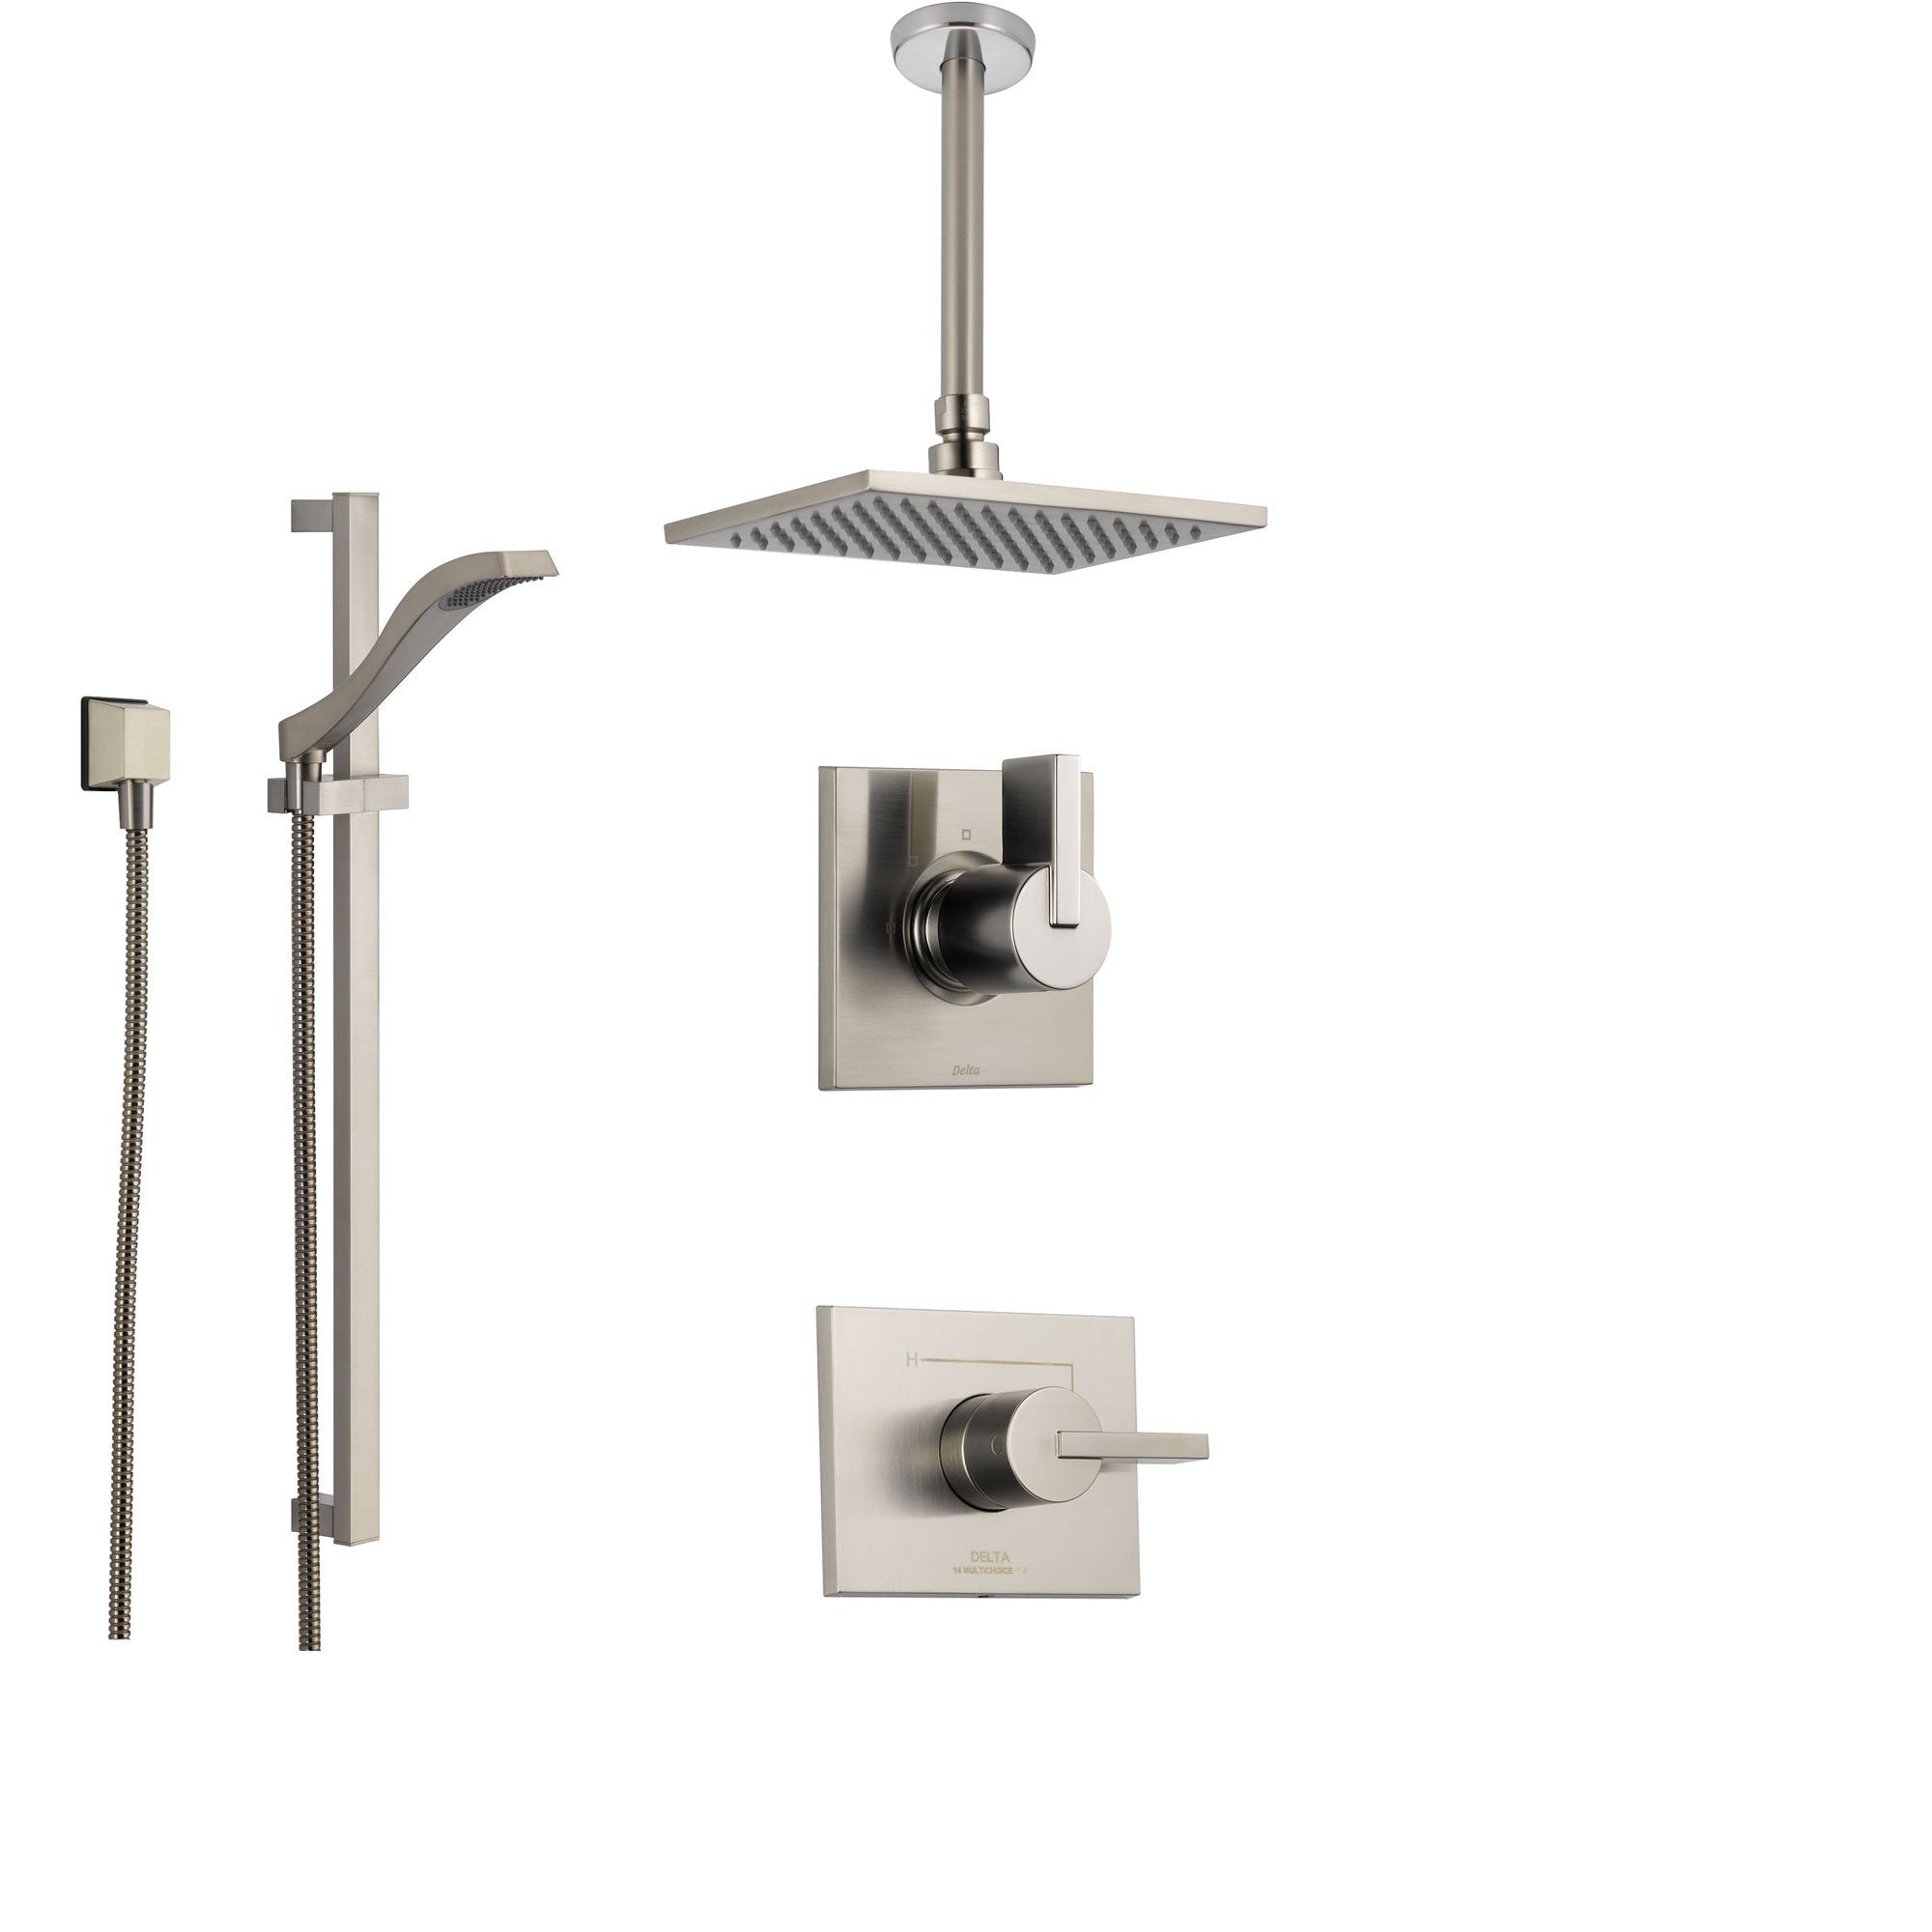 Delta Vero Stainless Steel Shower System with Normal Shower Handle, 3-setting Diverter, Large Square Rain Ceiling Mount Showerhead, and Handheld Shower SS145383SS